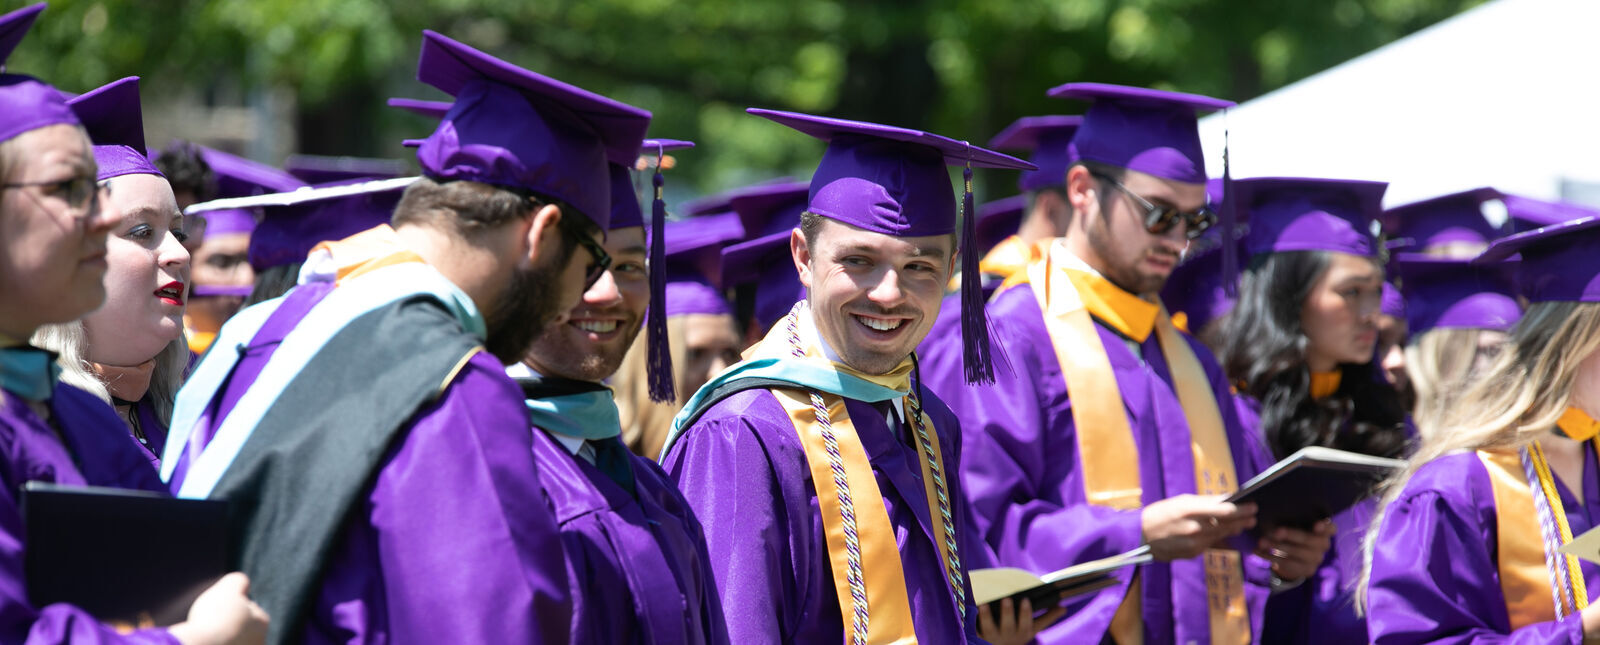 Some of the graduates smile at each other while standing during part of Commencement